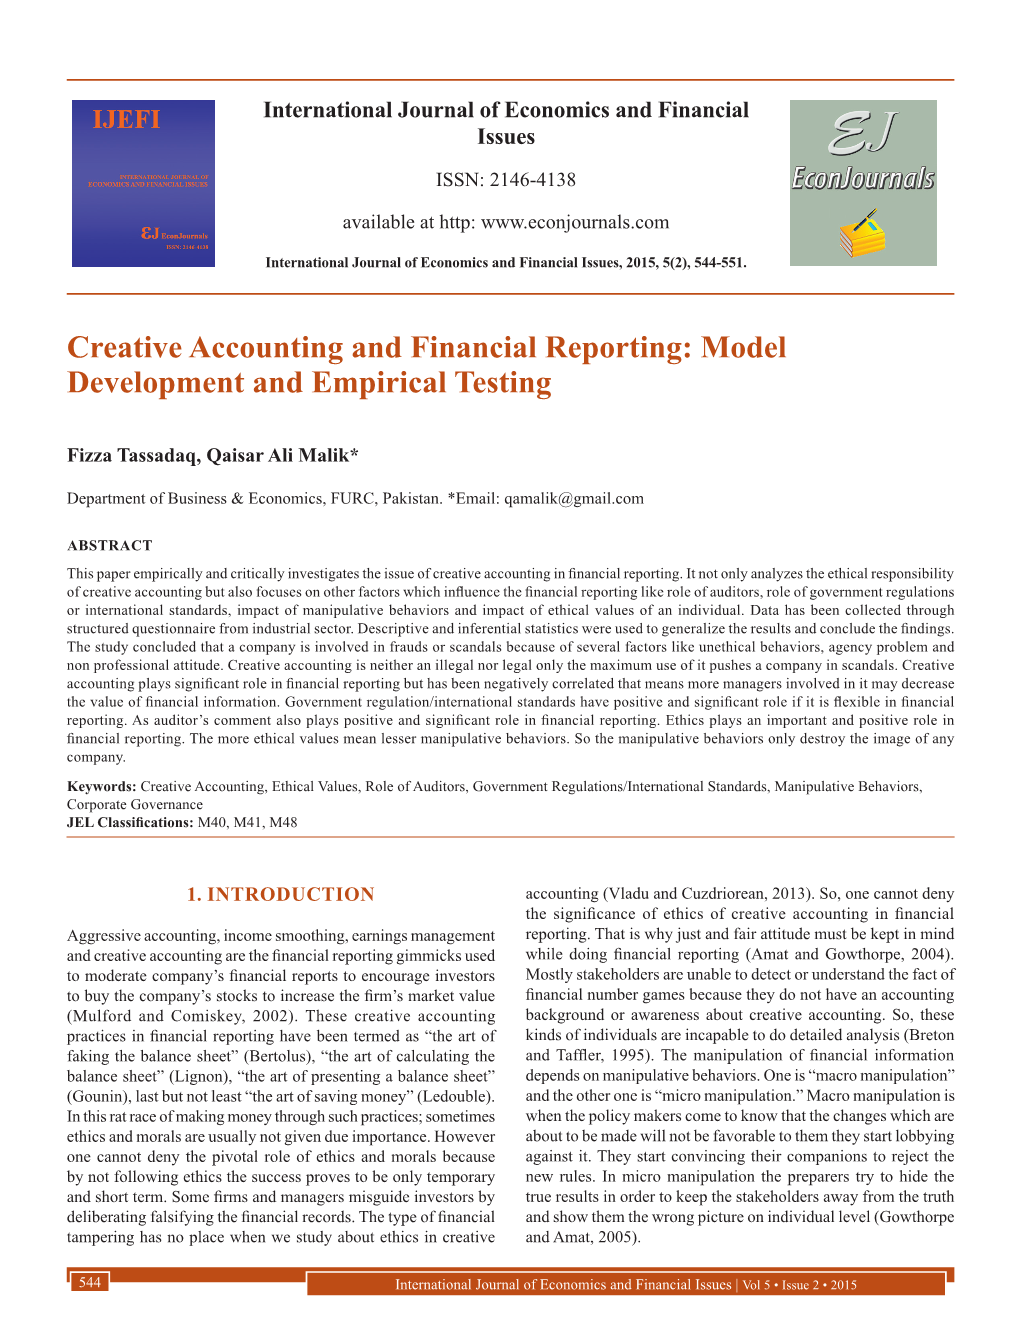 Creative Accounting and Financial Reporting: Model Development and Empirical Testing